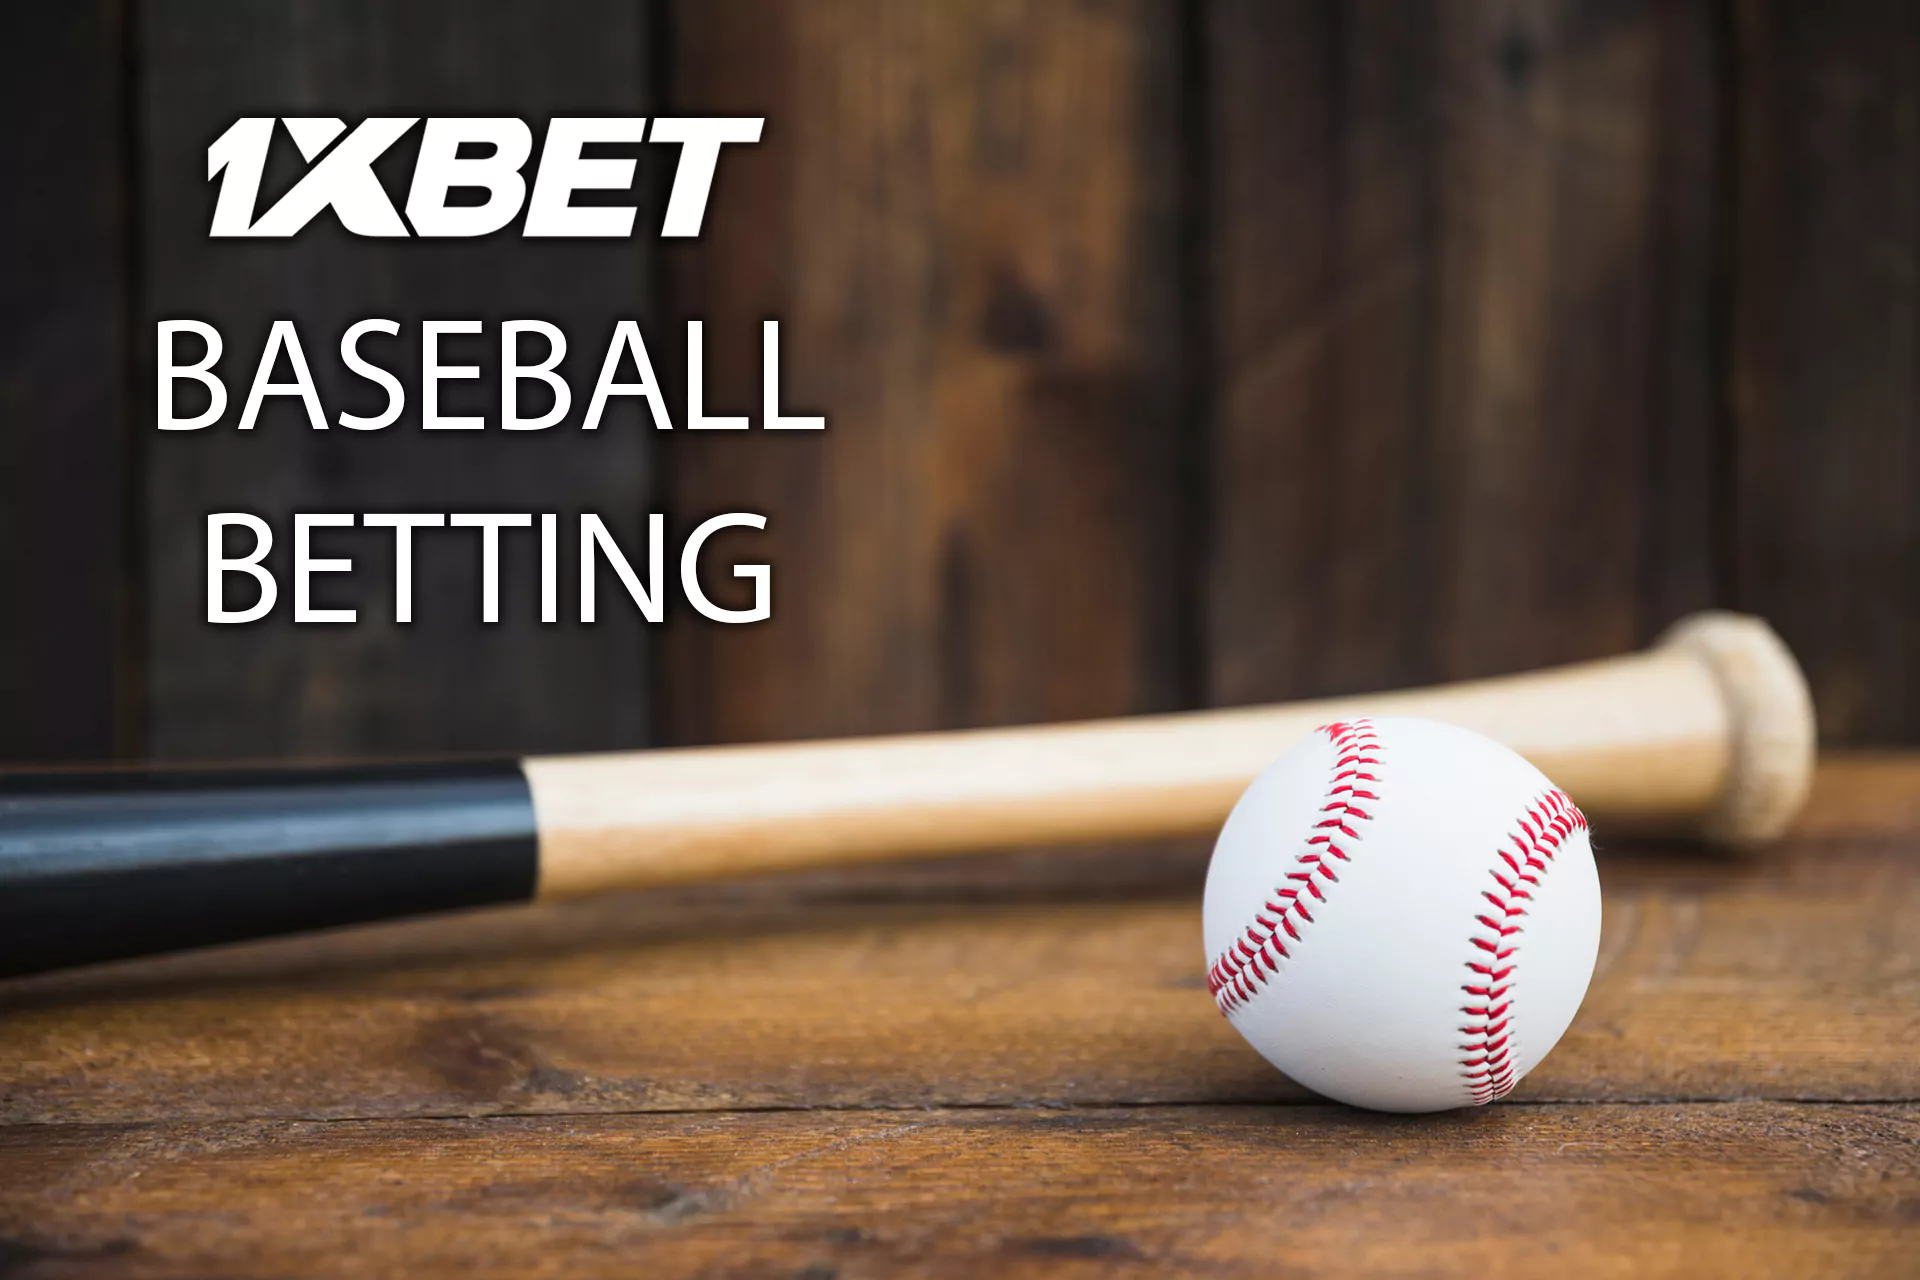 1xBet offers many competitions for baseball betting.